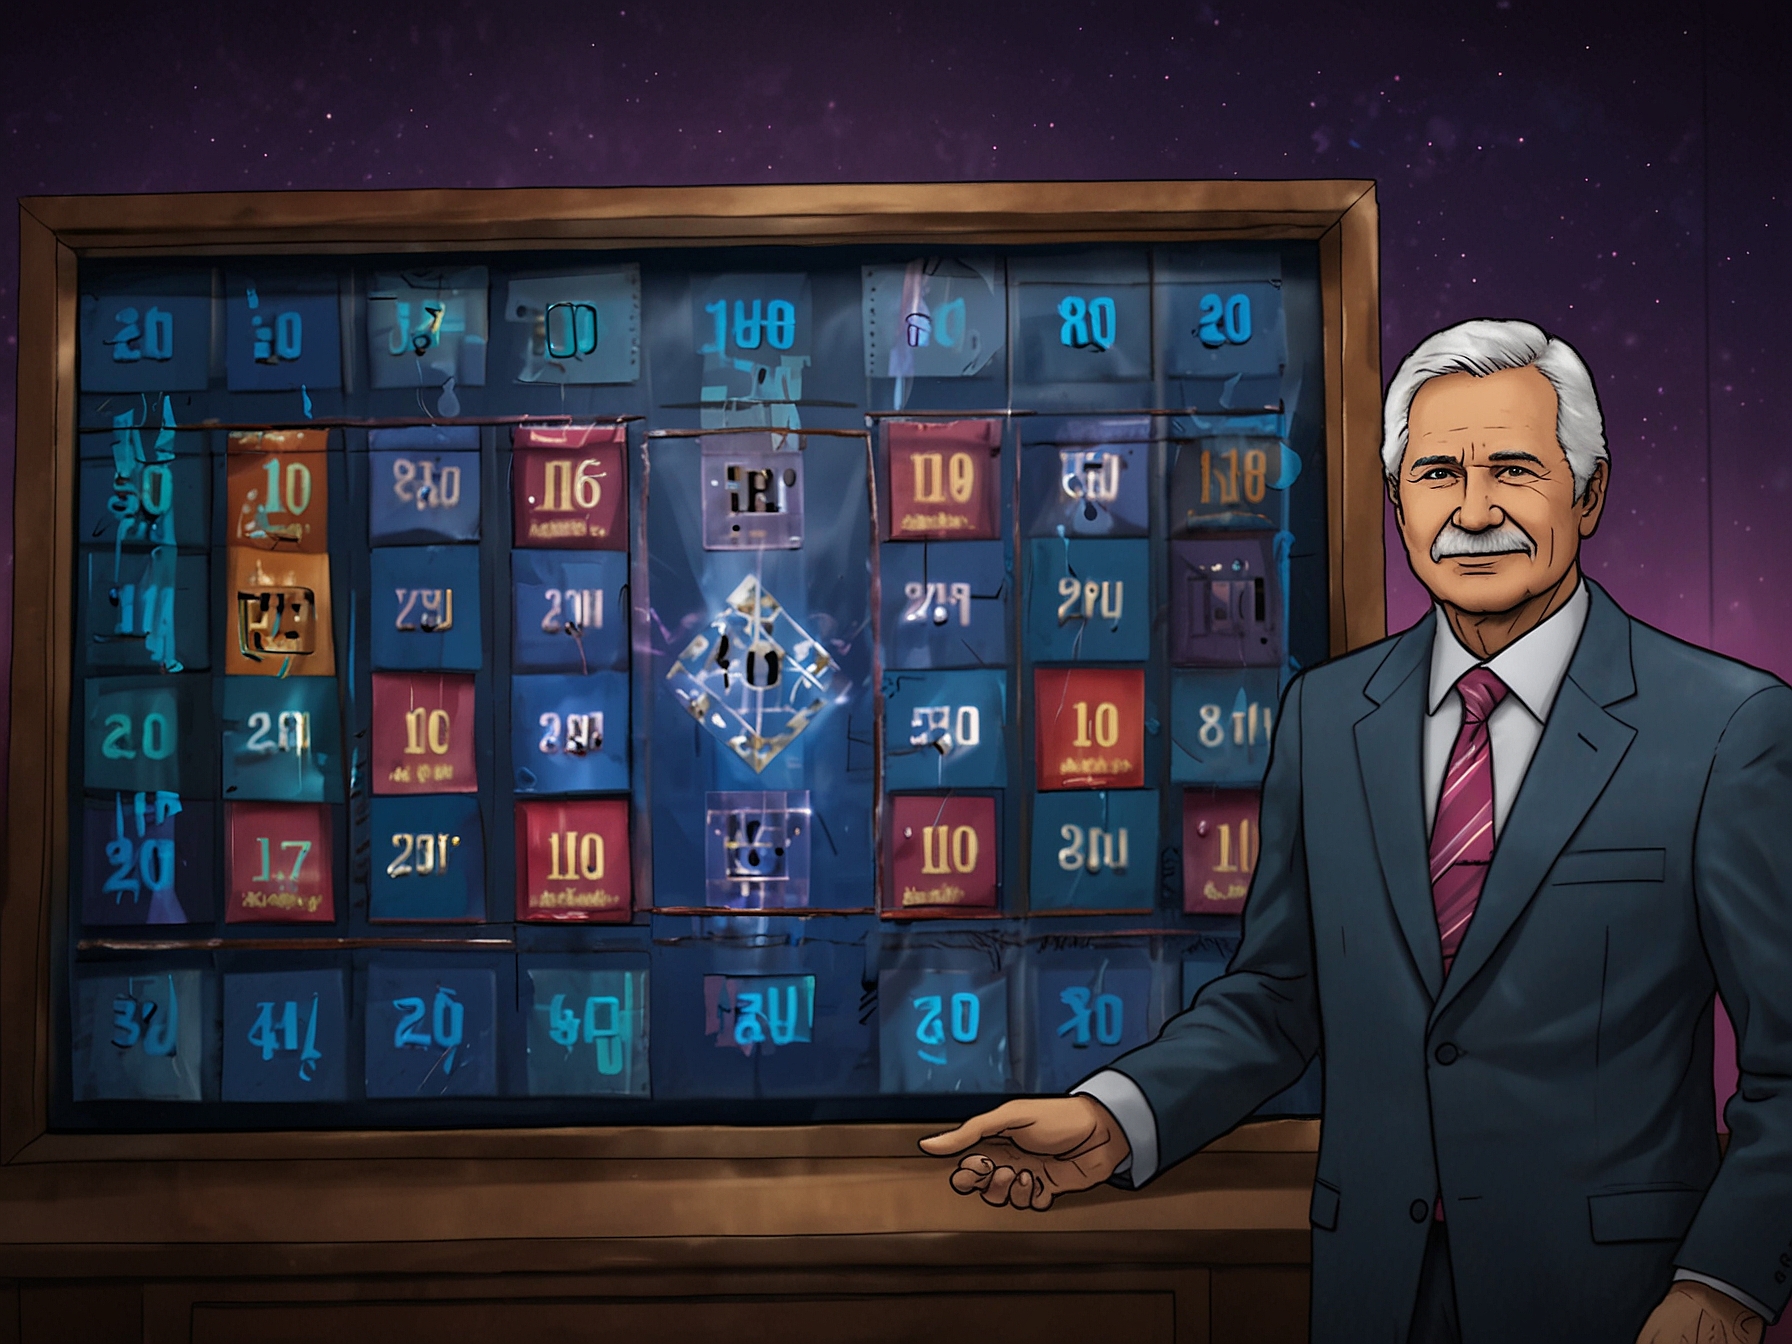 Close-up of the iconic Jeopardy! game board, symbolizing the continuation of the show's legacy.